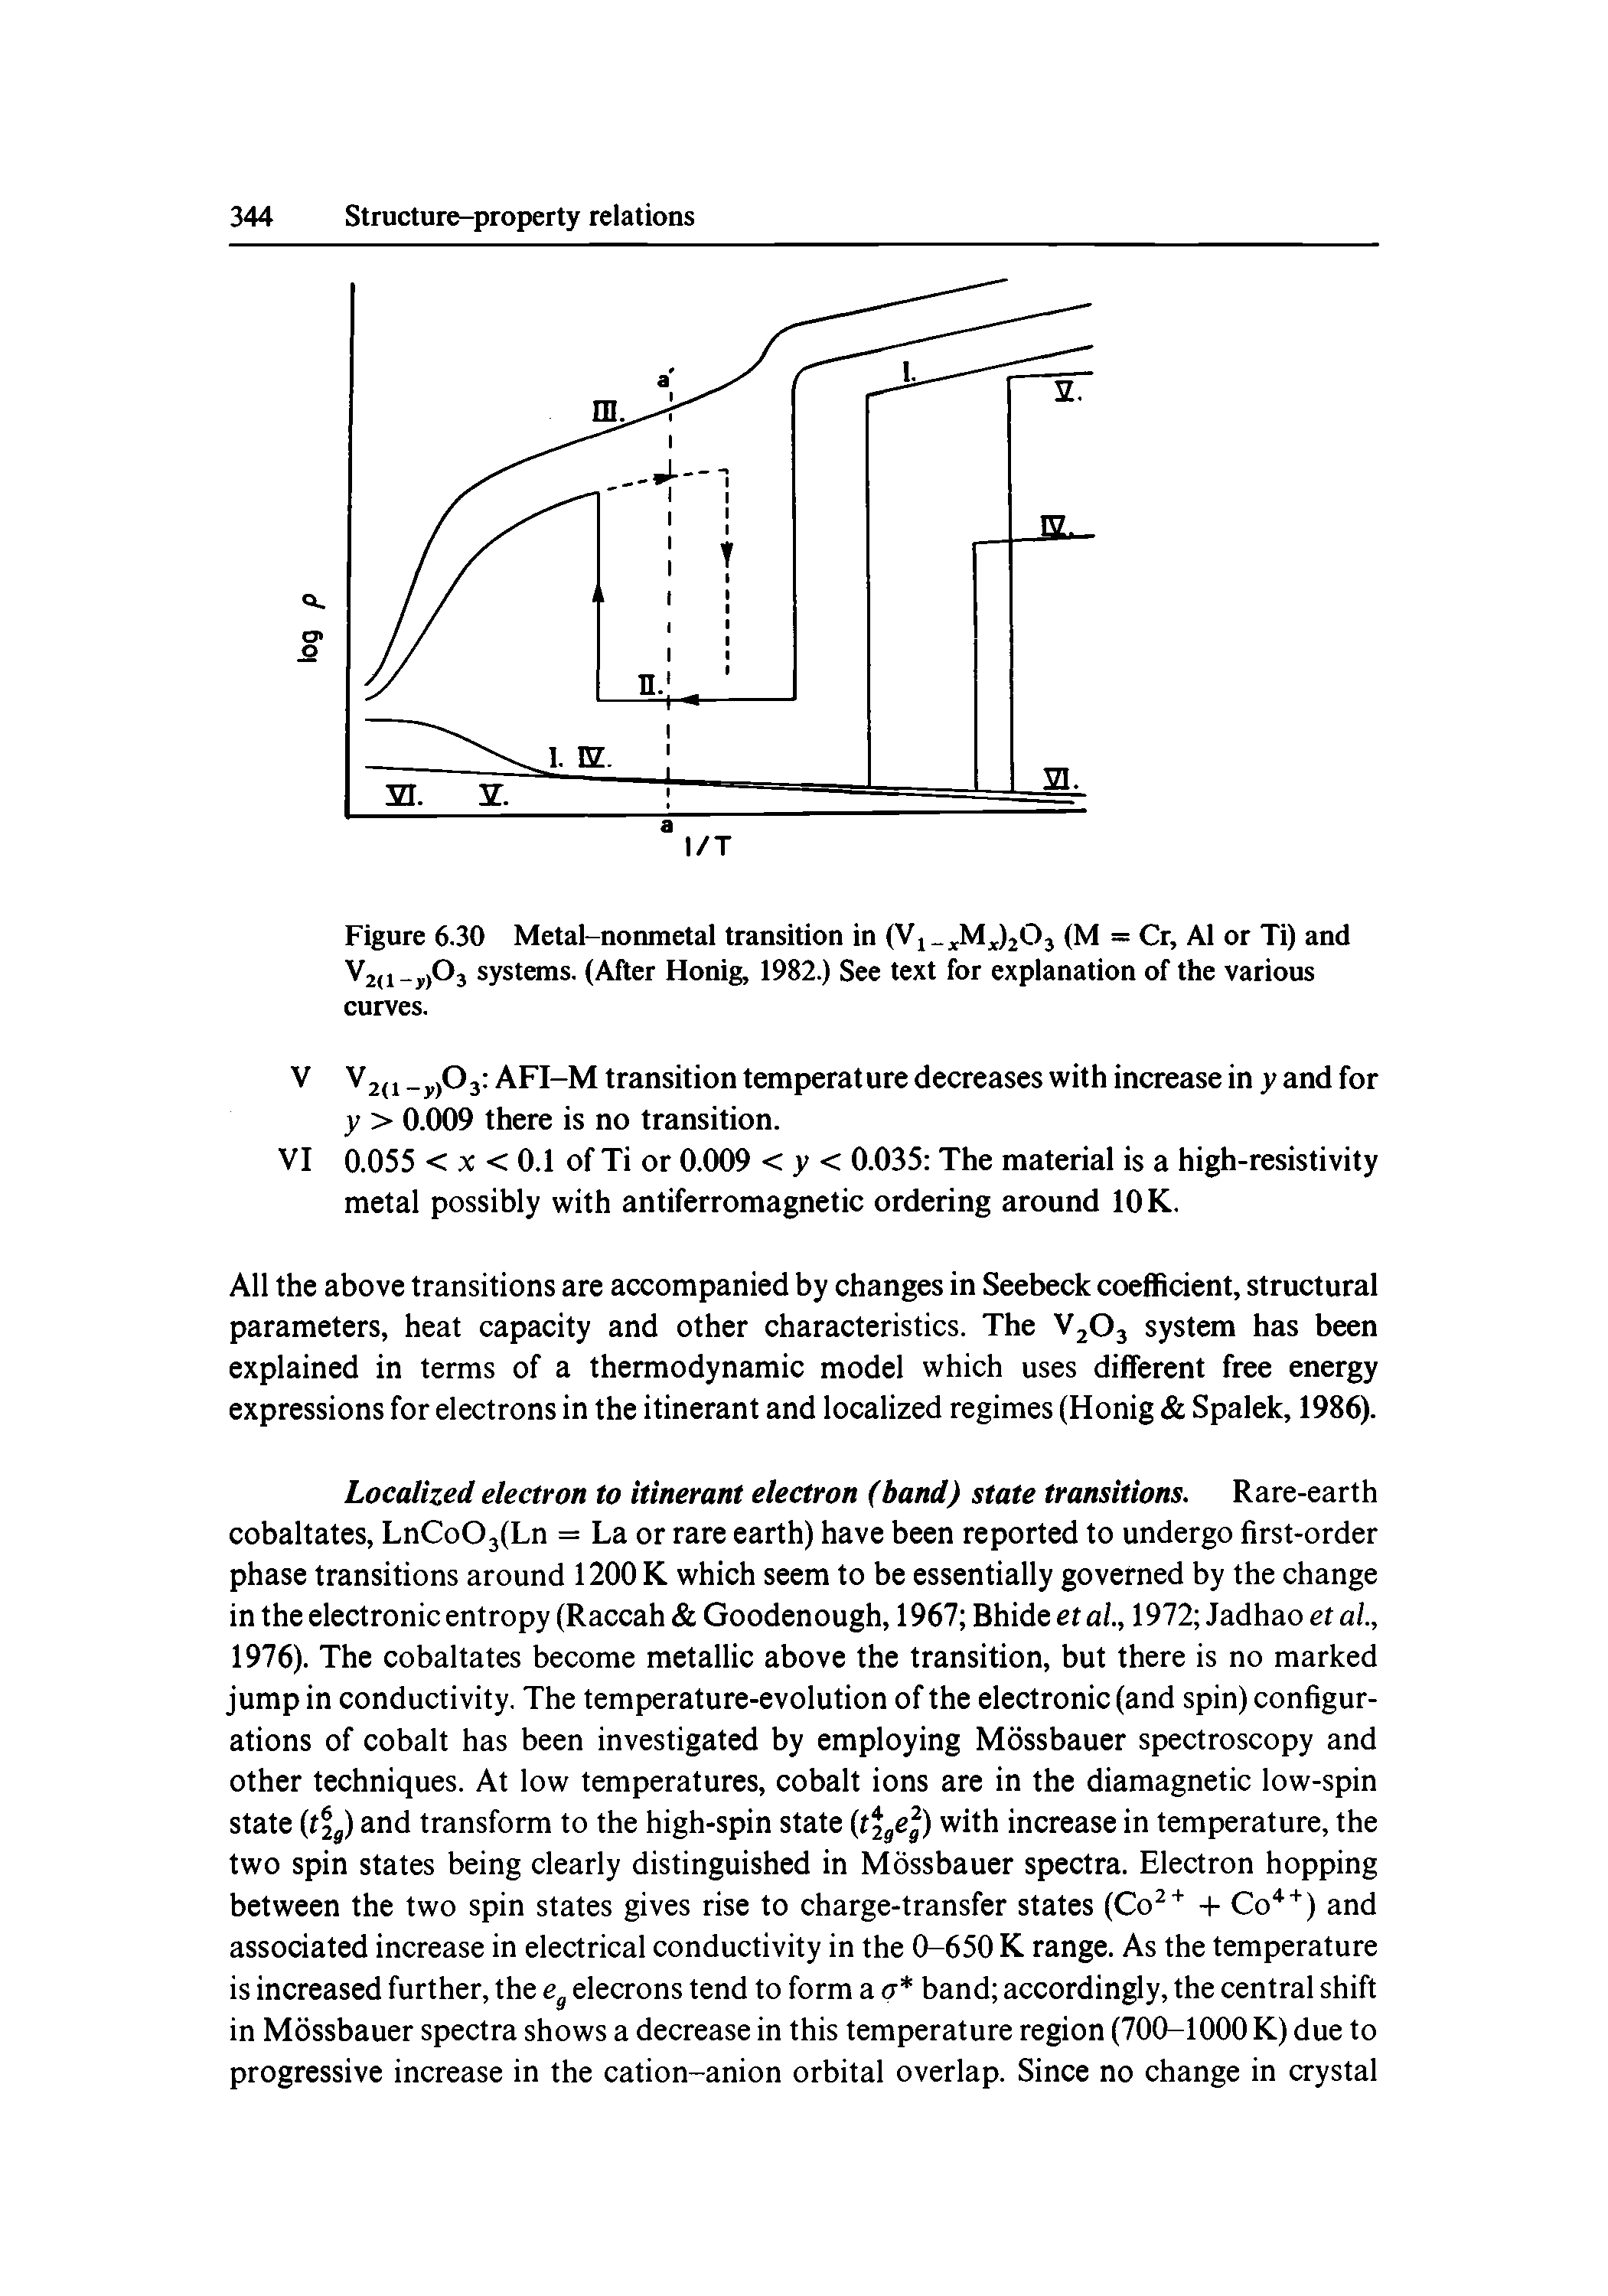 Figure 6.30 Metal-nonmetal transition in (Vi Mj203 (M = Cr, A1 or Ti) and V2,i-j,)03 systems. (After Honig, 1982.) See text for explanation of the various curves.